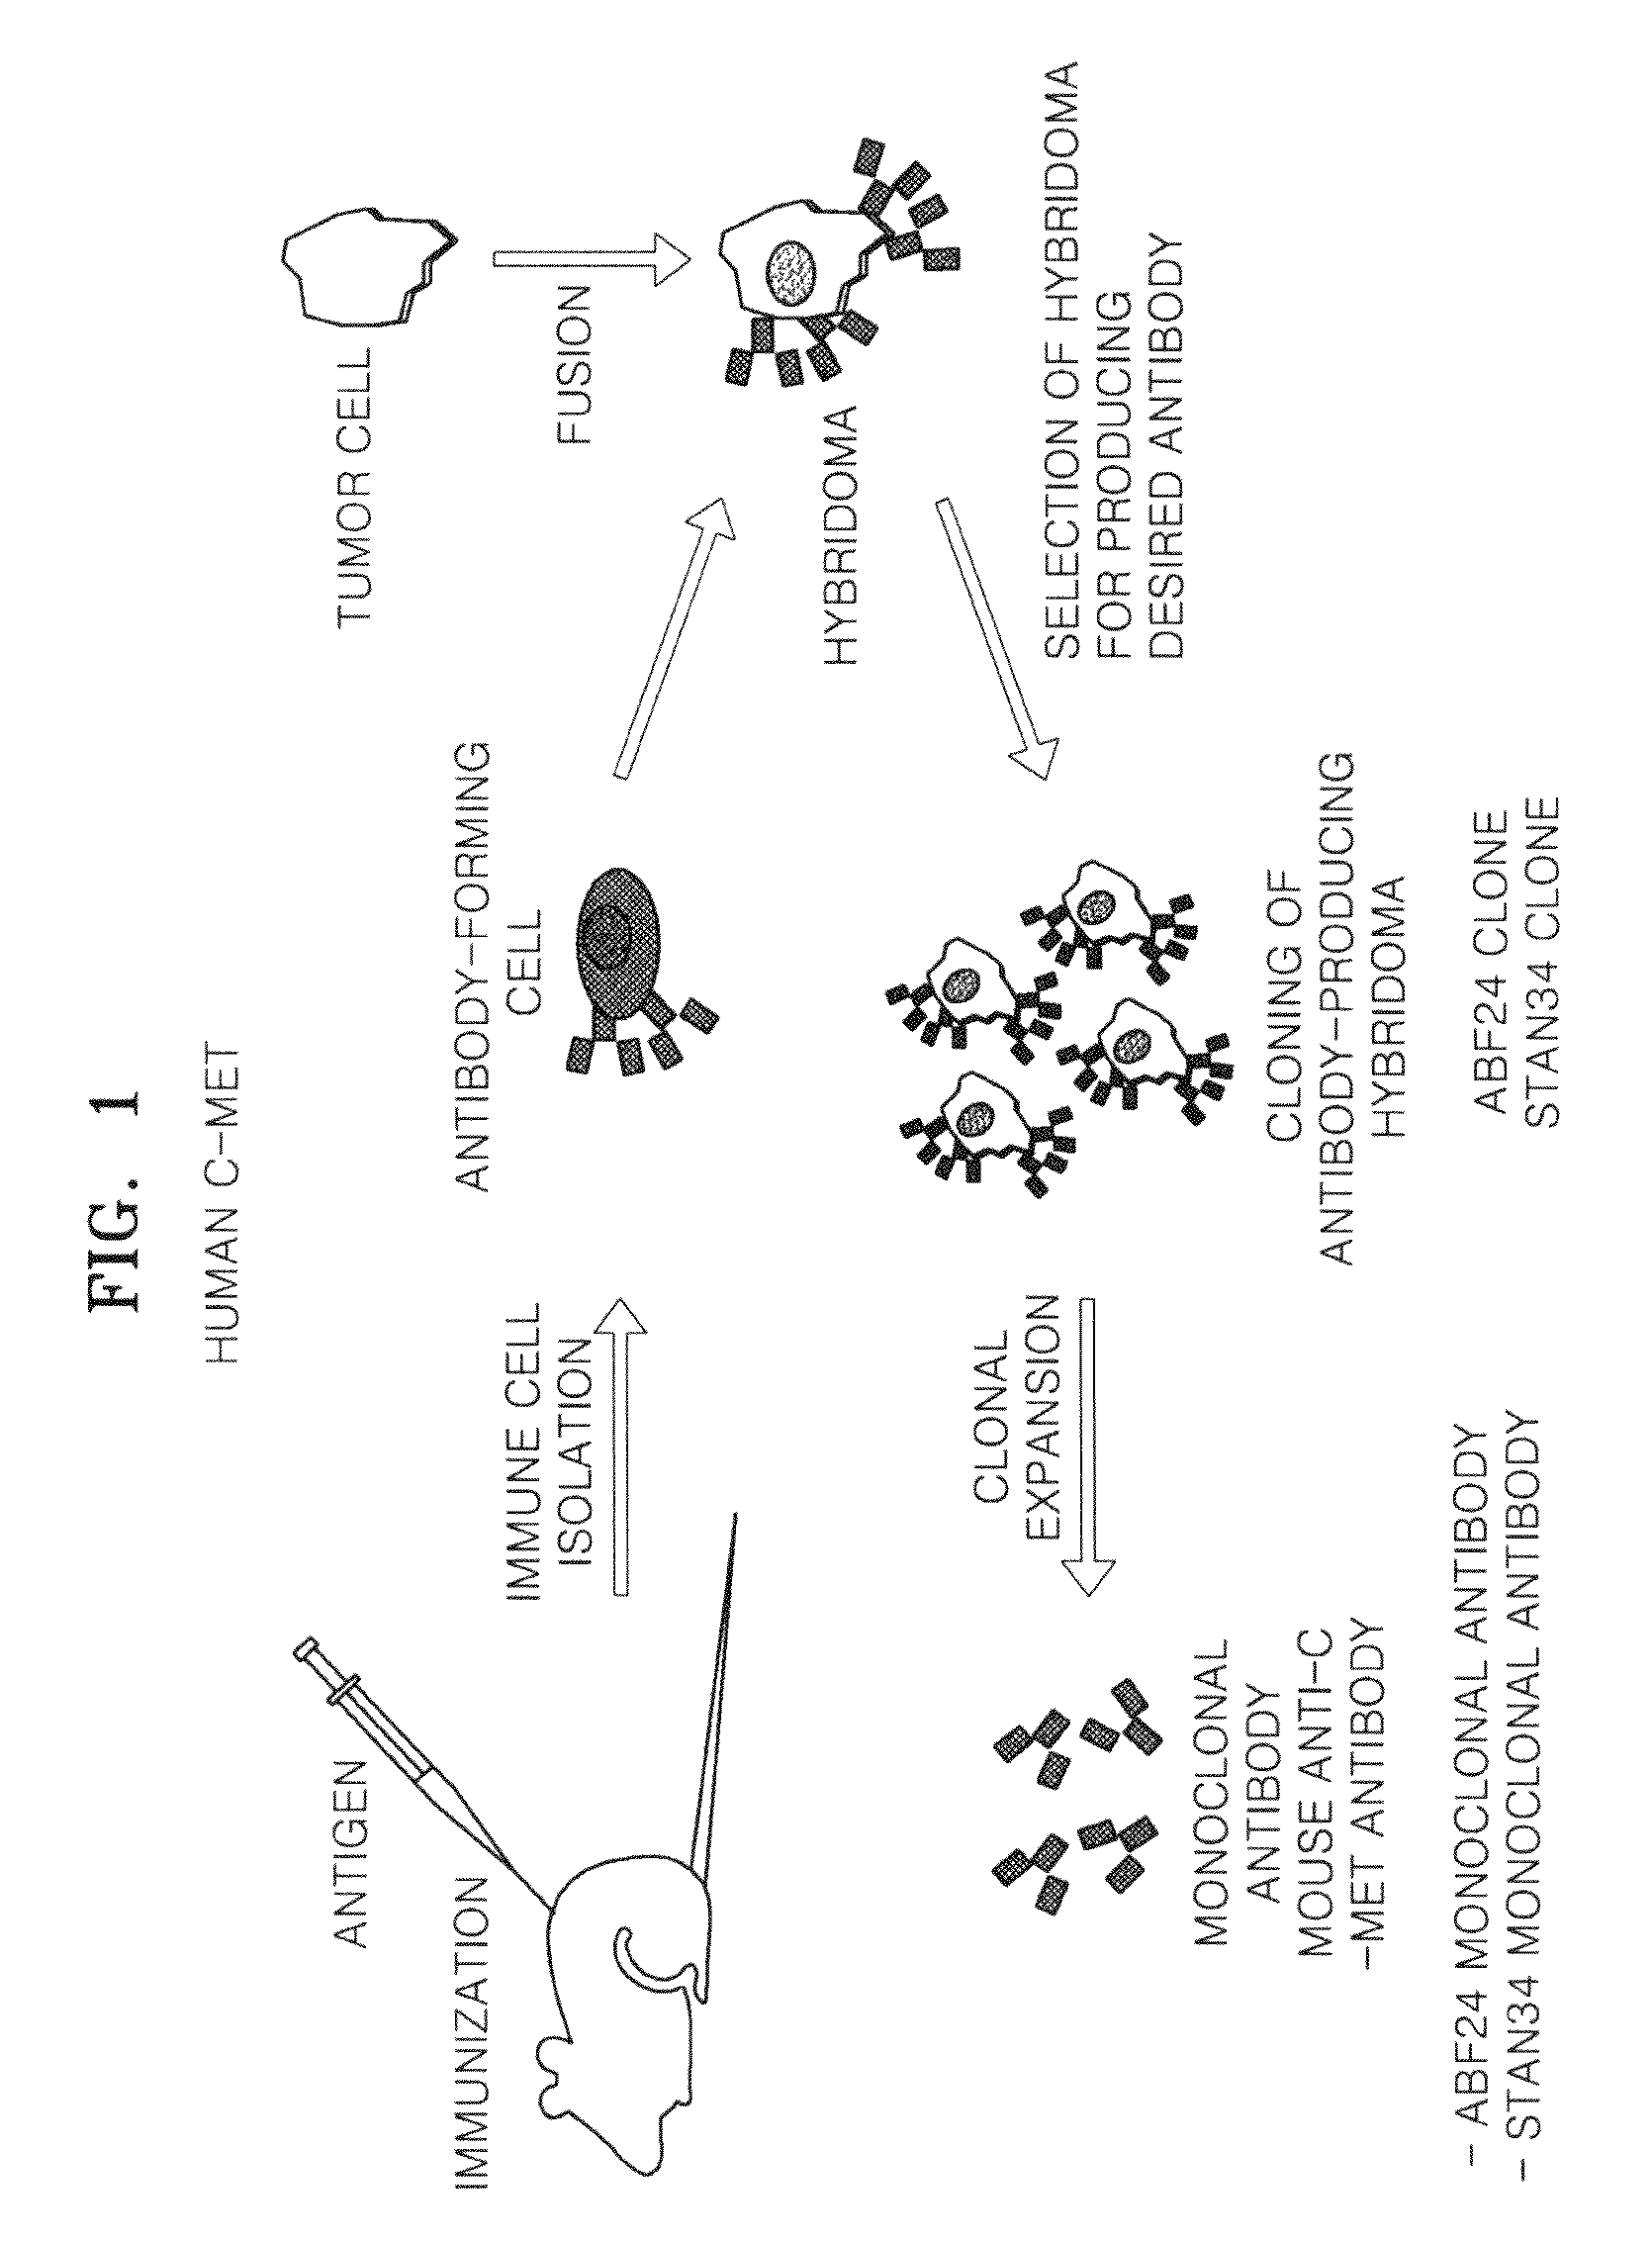 Antibody specifically binding to c-Met and methods of use